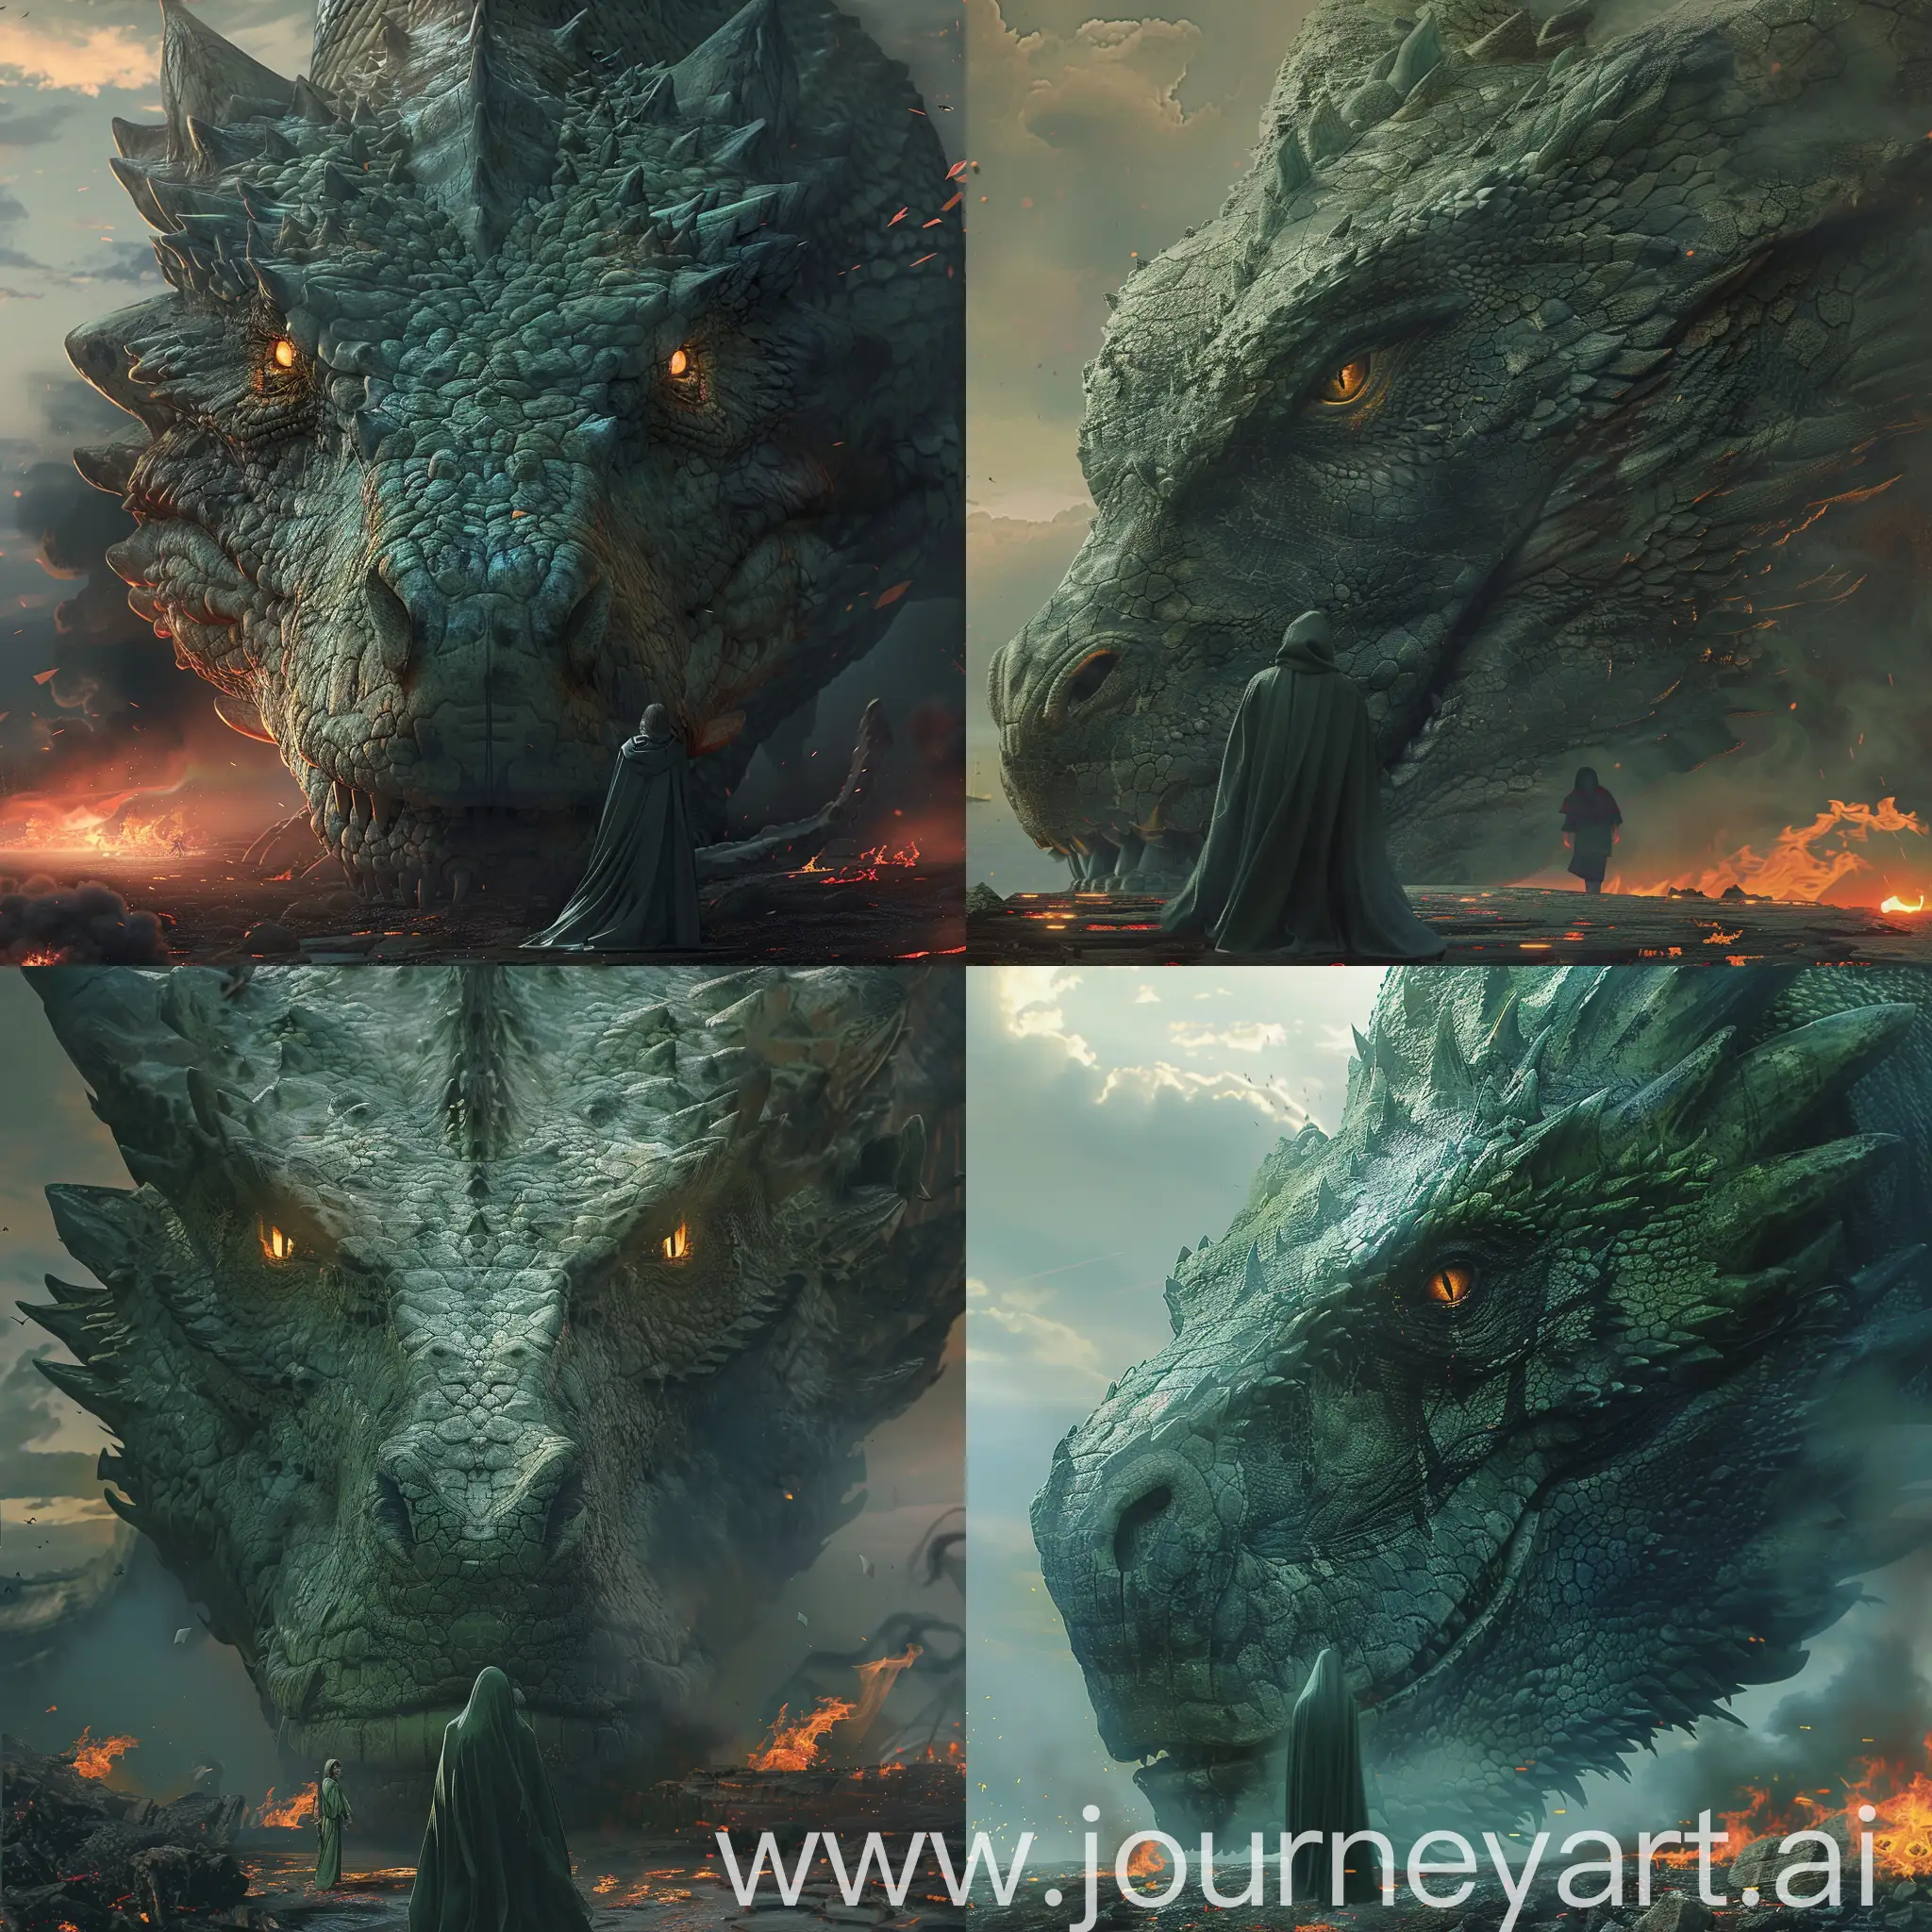 In this powerful composition, a towering, sea-green dragon fills the frame, its colossal head and layered scales finely detailed, creating a texture reminiscent of ancient, weathered stone. Its piercing amber eyes, embers set within a craggy face, fixate intensely on a diminutive, cloaked figure standing before it. The figure, draped in a dark, flowing robe that echoes the murky tones of the terrain, exudes a quiet strength and seems undaunted by the immense creature. Behind them, the landscape bears the scars of dragonfire, with smoldering embers and tendrils of smoke that rise into a dusky sky, subtly illuminated by the remnants of a sunset. The composition contrasts the scale and wild nature of the dragon with the poised, enigmatic figure, suggesting a narrative filled with tension and impending drama. The scene is a masterful balance of light and shadow, color, and form, capturing a moment that teeters between confrontation and communion